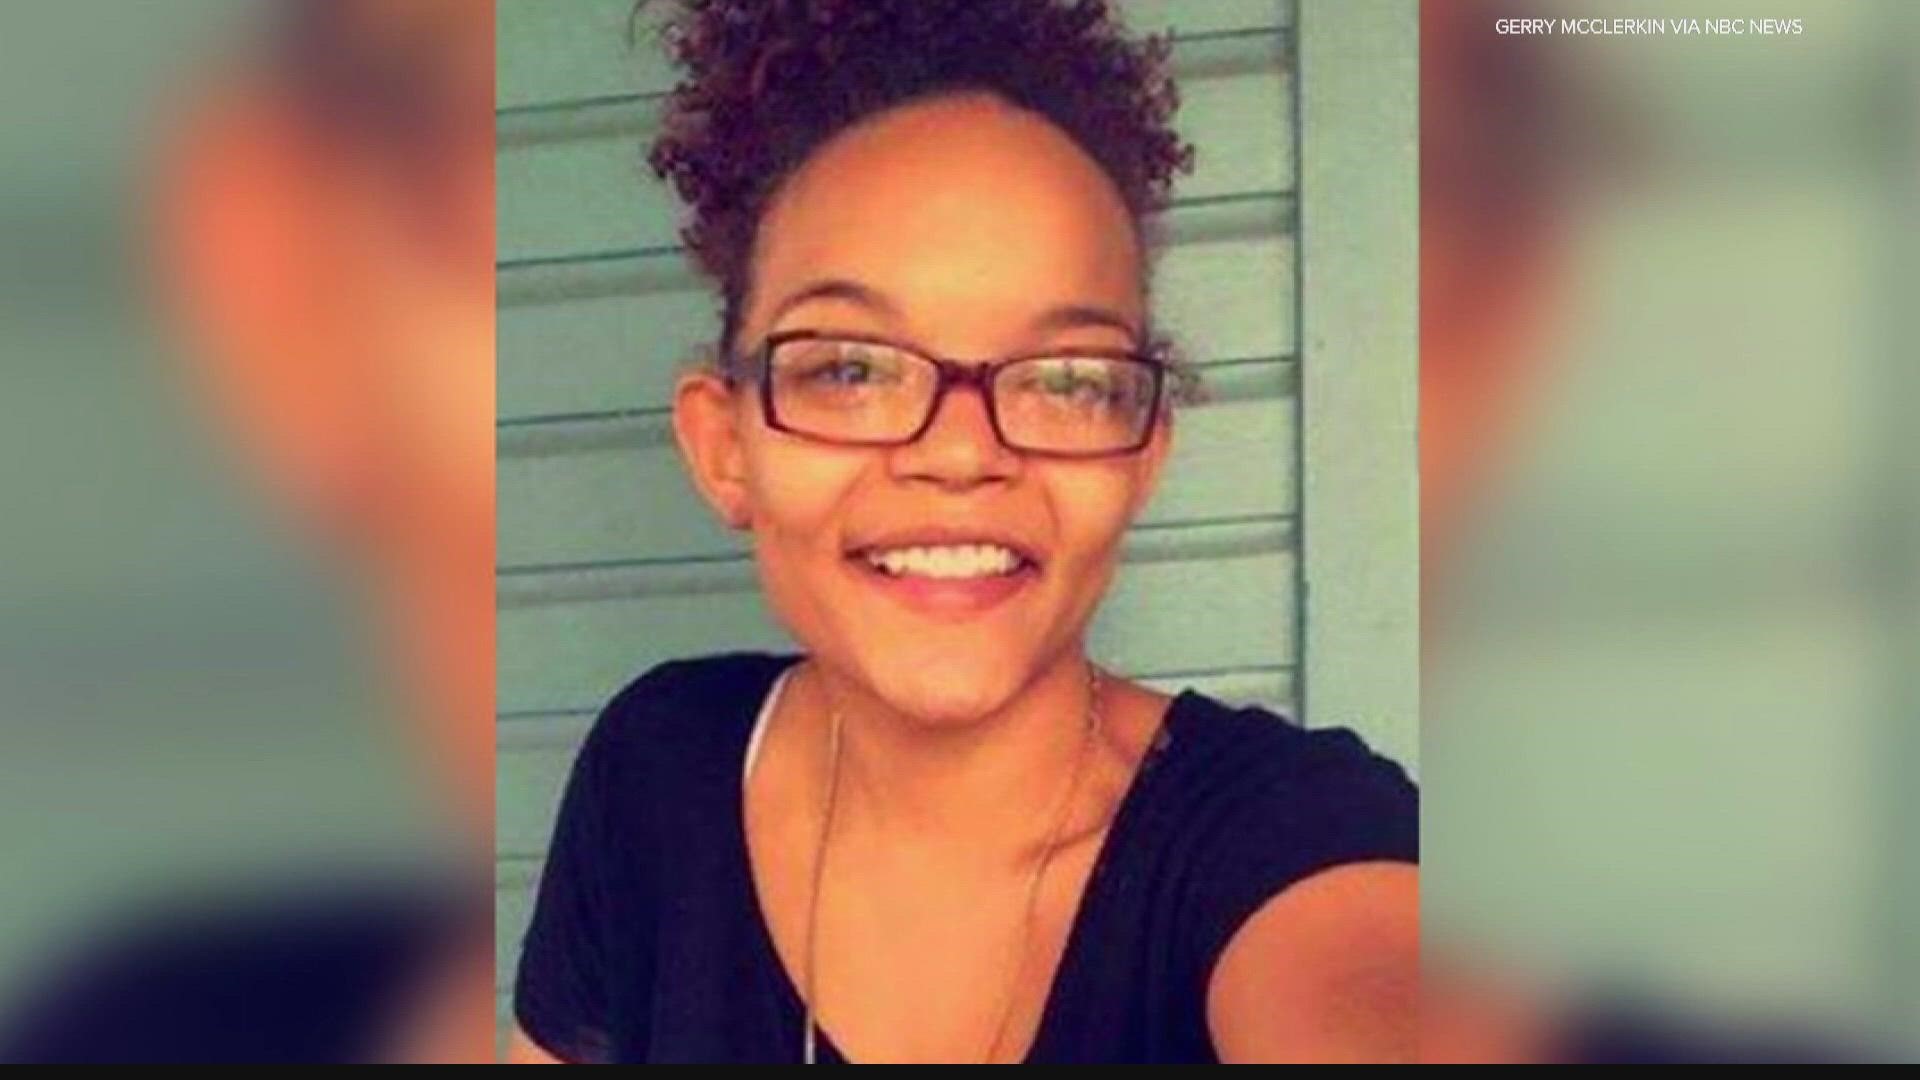 McClerkin was 18 when she disappeared from Kokomo in October of 2016.